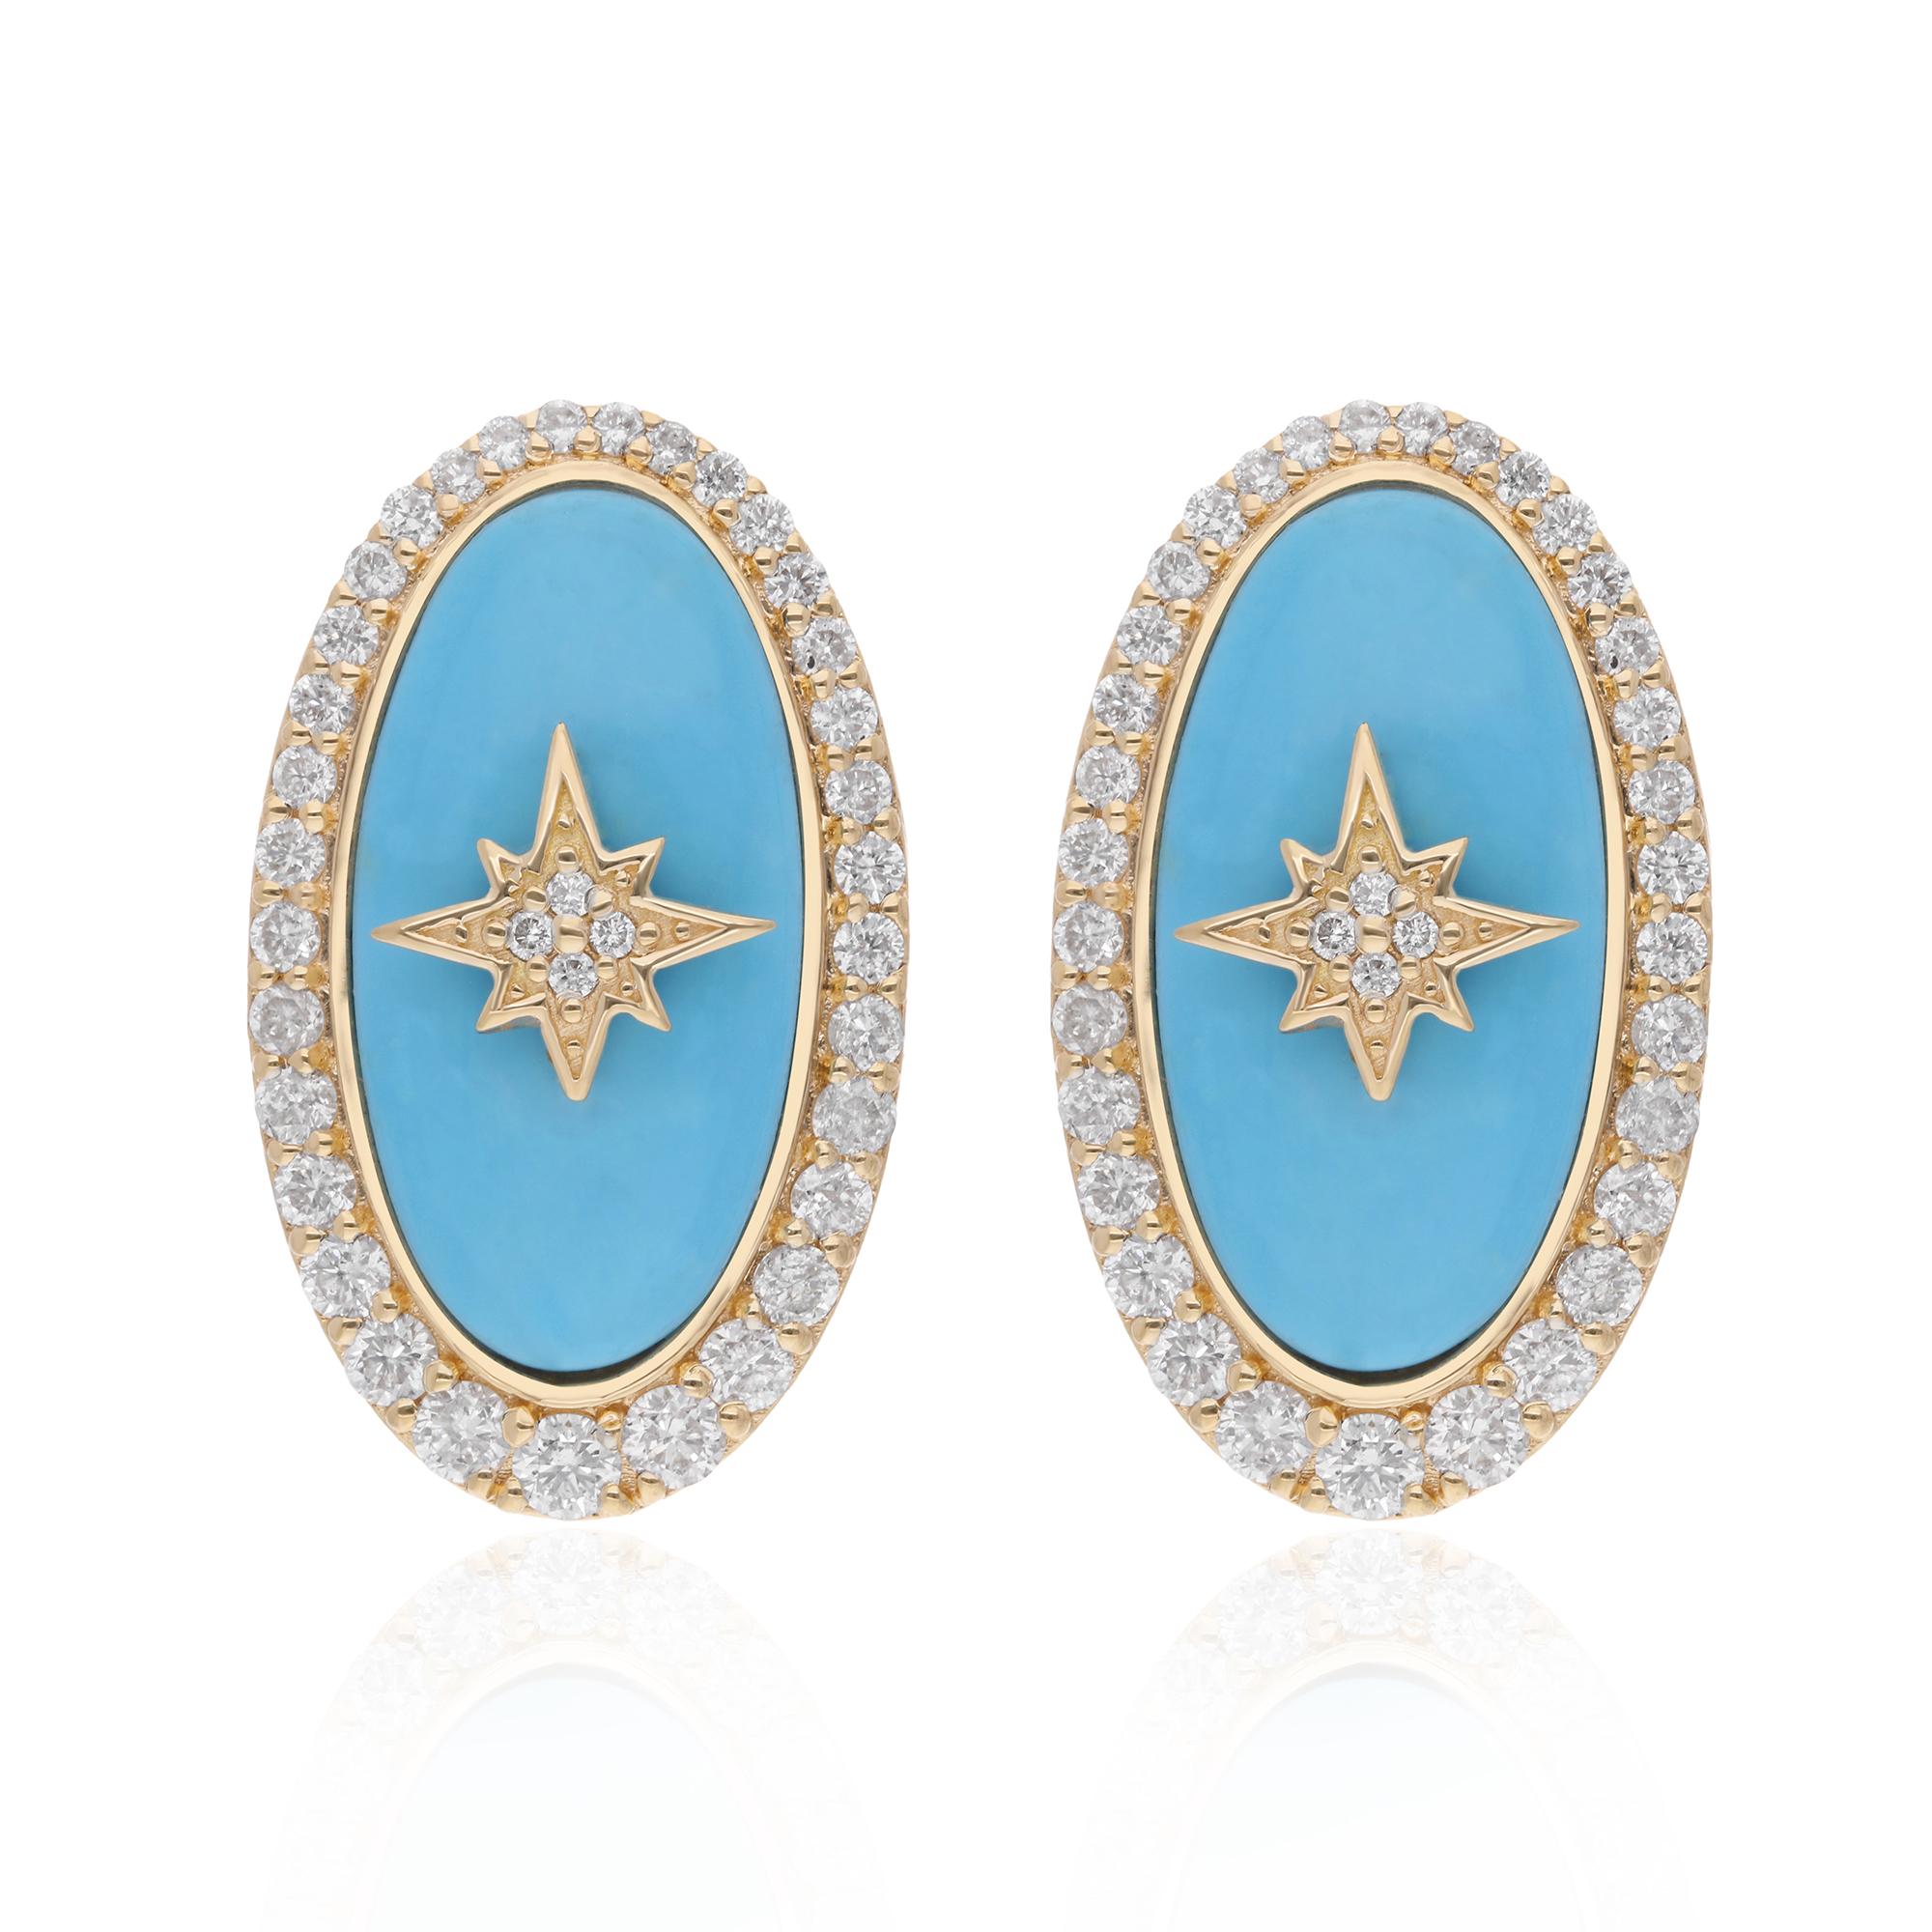 Indulge in the celestial allure of these Natural Oval Turquoise Starburst Earrings, where the timeless elegance of turquoise meets the radiant sparkle of diamonds, all embraced within the warmth of 14 Karat Yellow Gold. Crafted to captivate, these